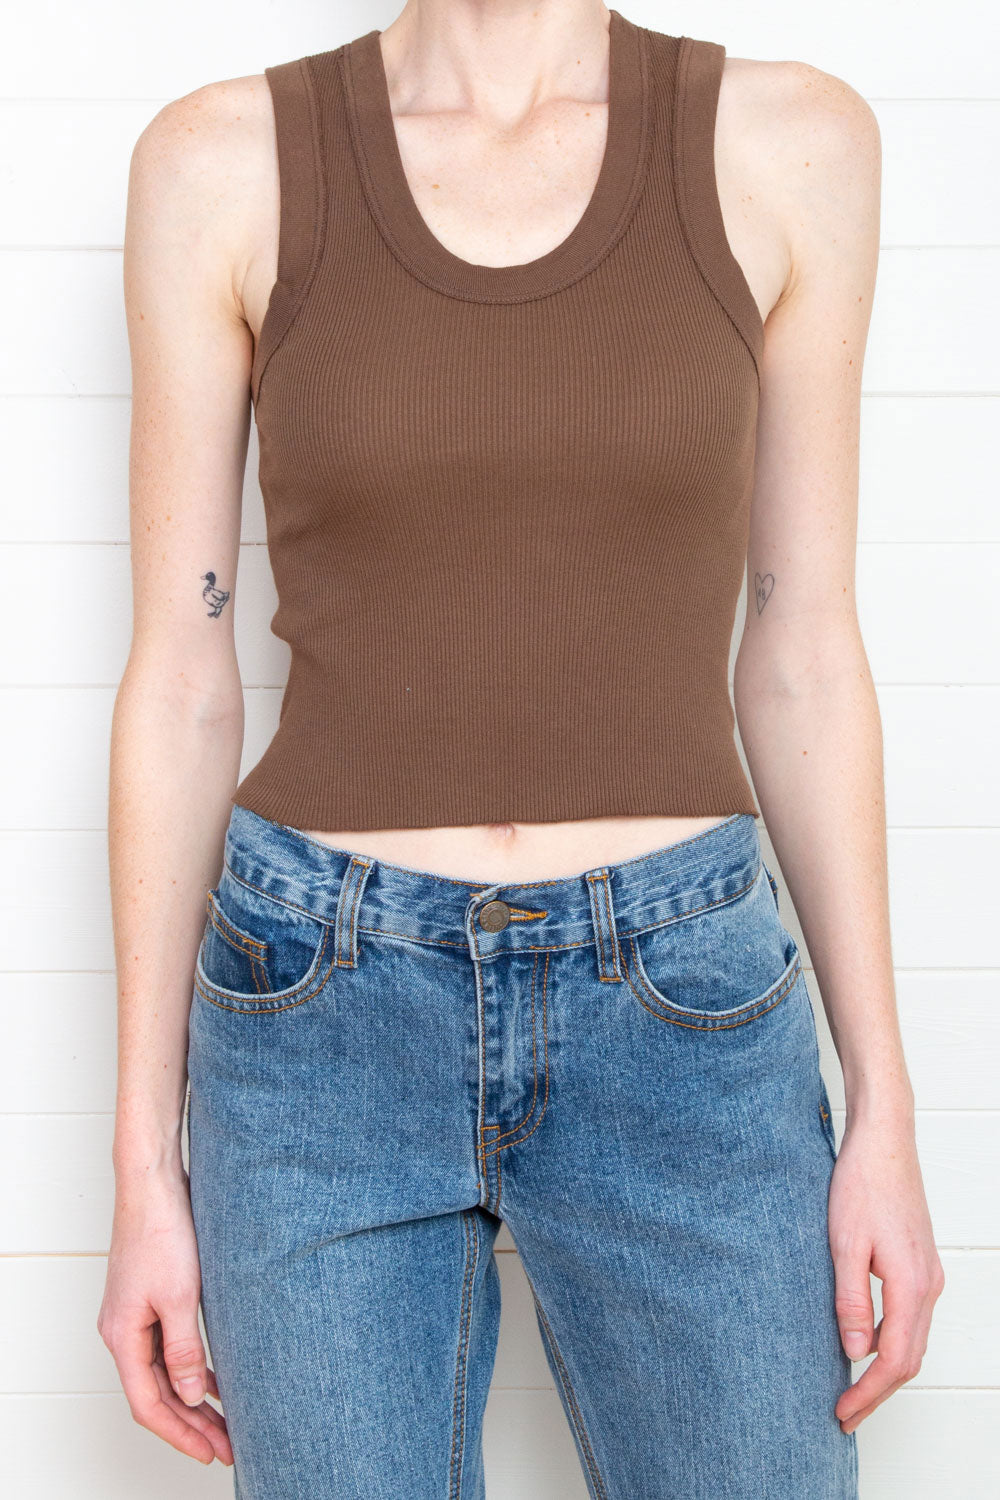 Brandy Melville connor tank top White - $10 (37% Off Retail) - From autumn